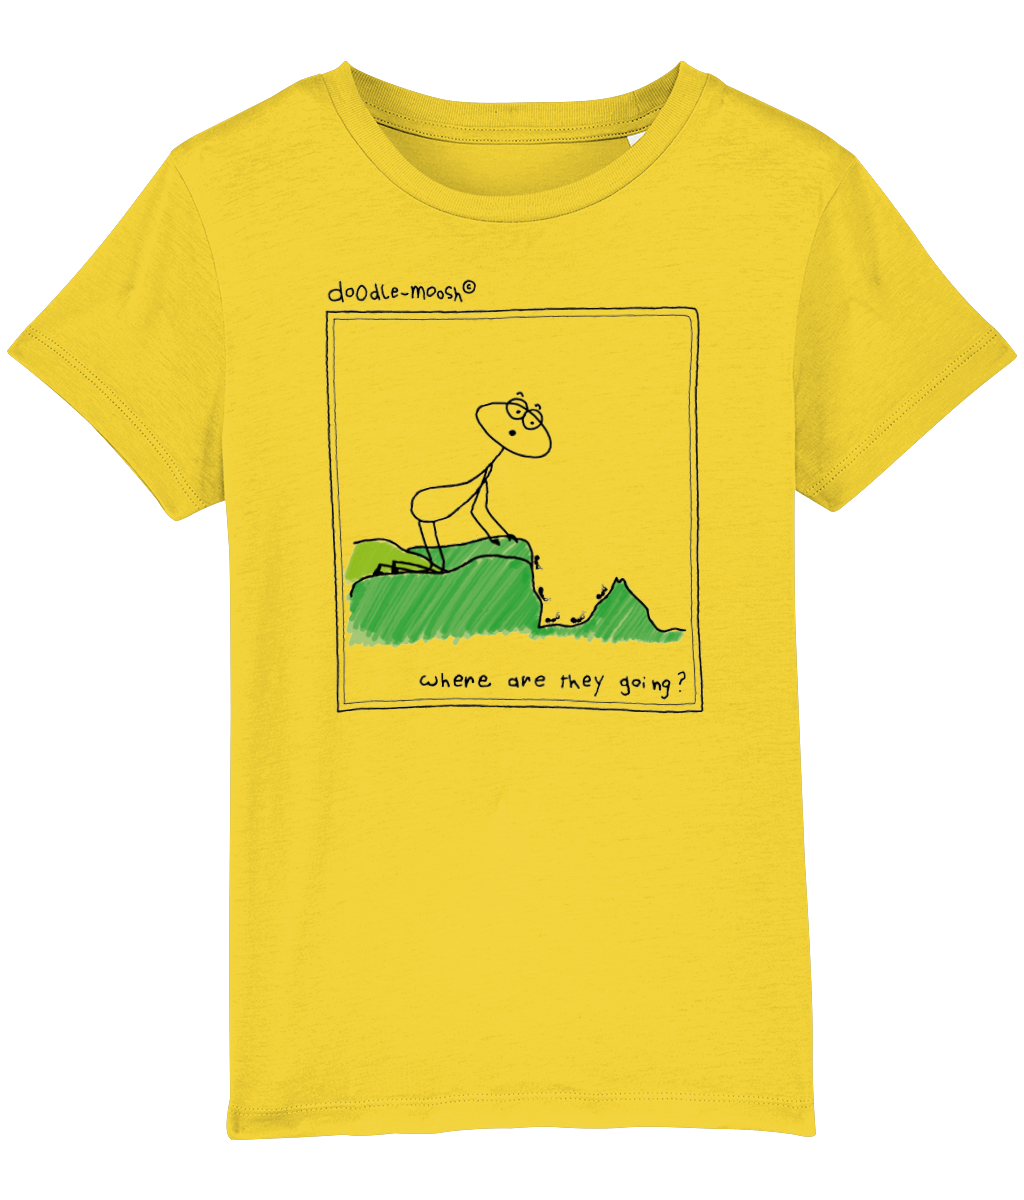 Where are they going t-shirt, yellow with black, colourful drawing